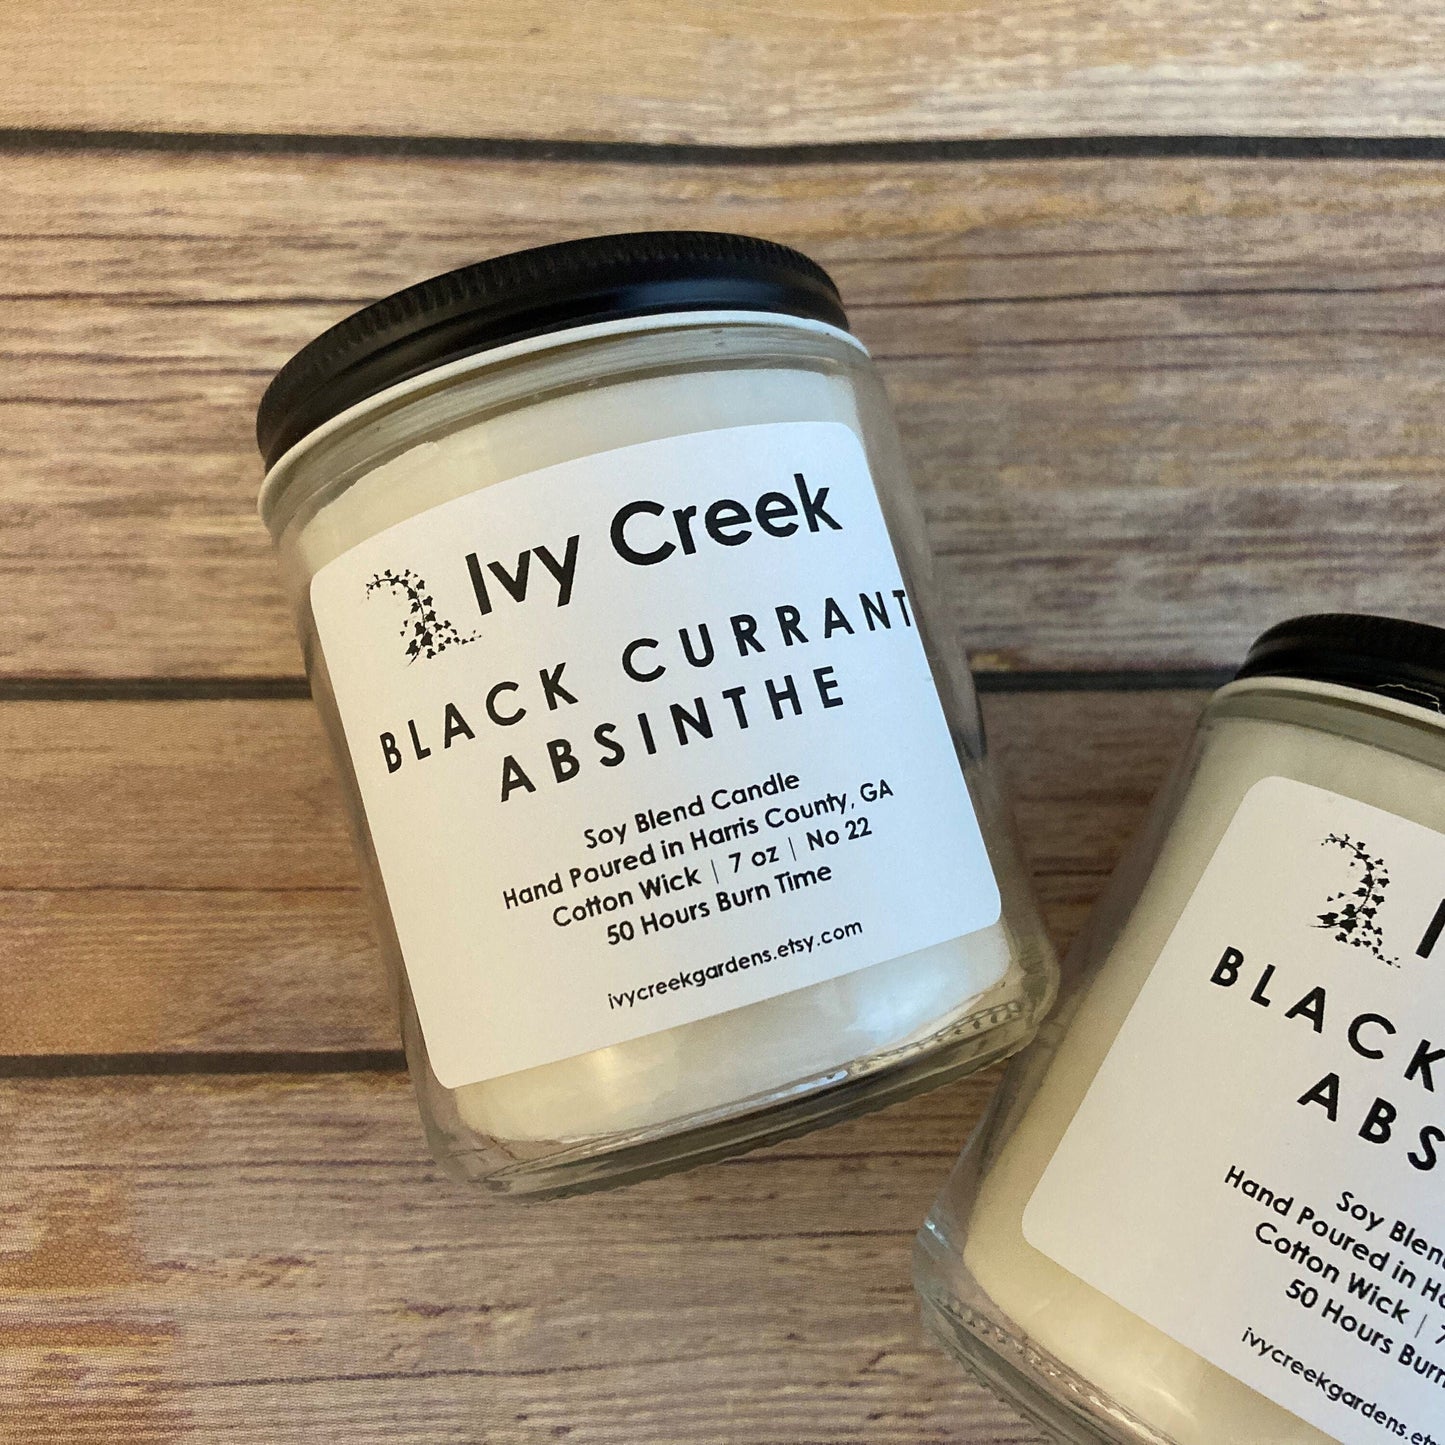 Ivy Creek No 22 | Black Currant Absinthe Soy Blend Candle | Hand Poured | 7 oz | Cotton Wick | Small Batch | Clean Burning